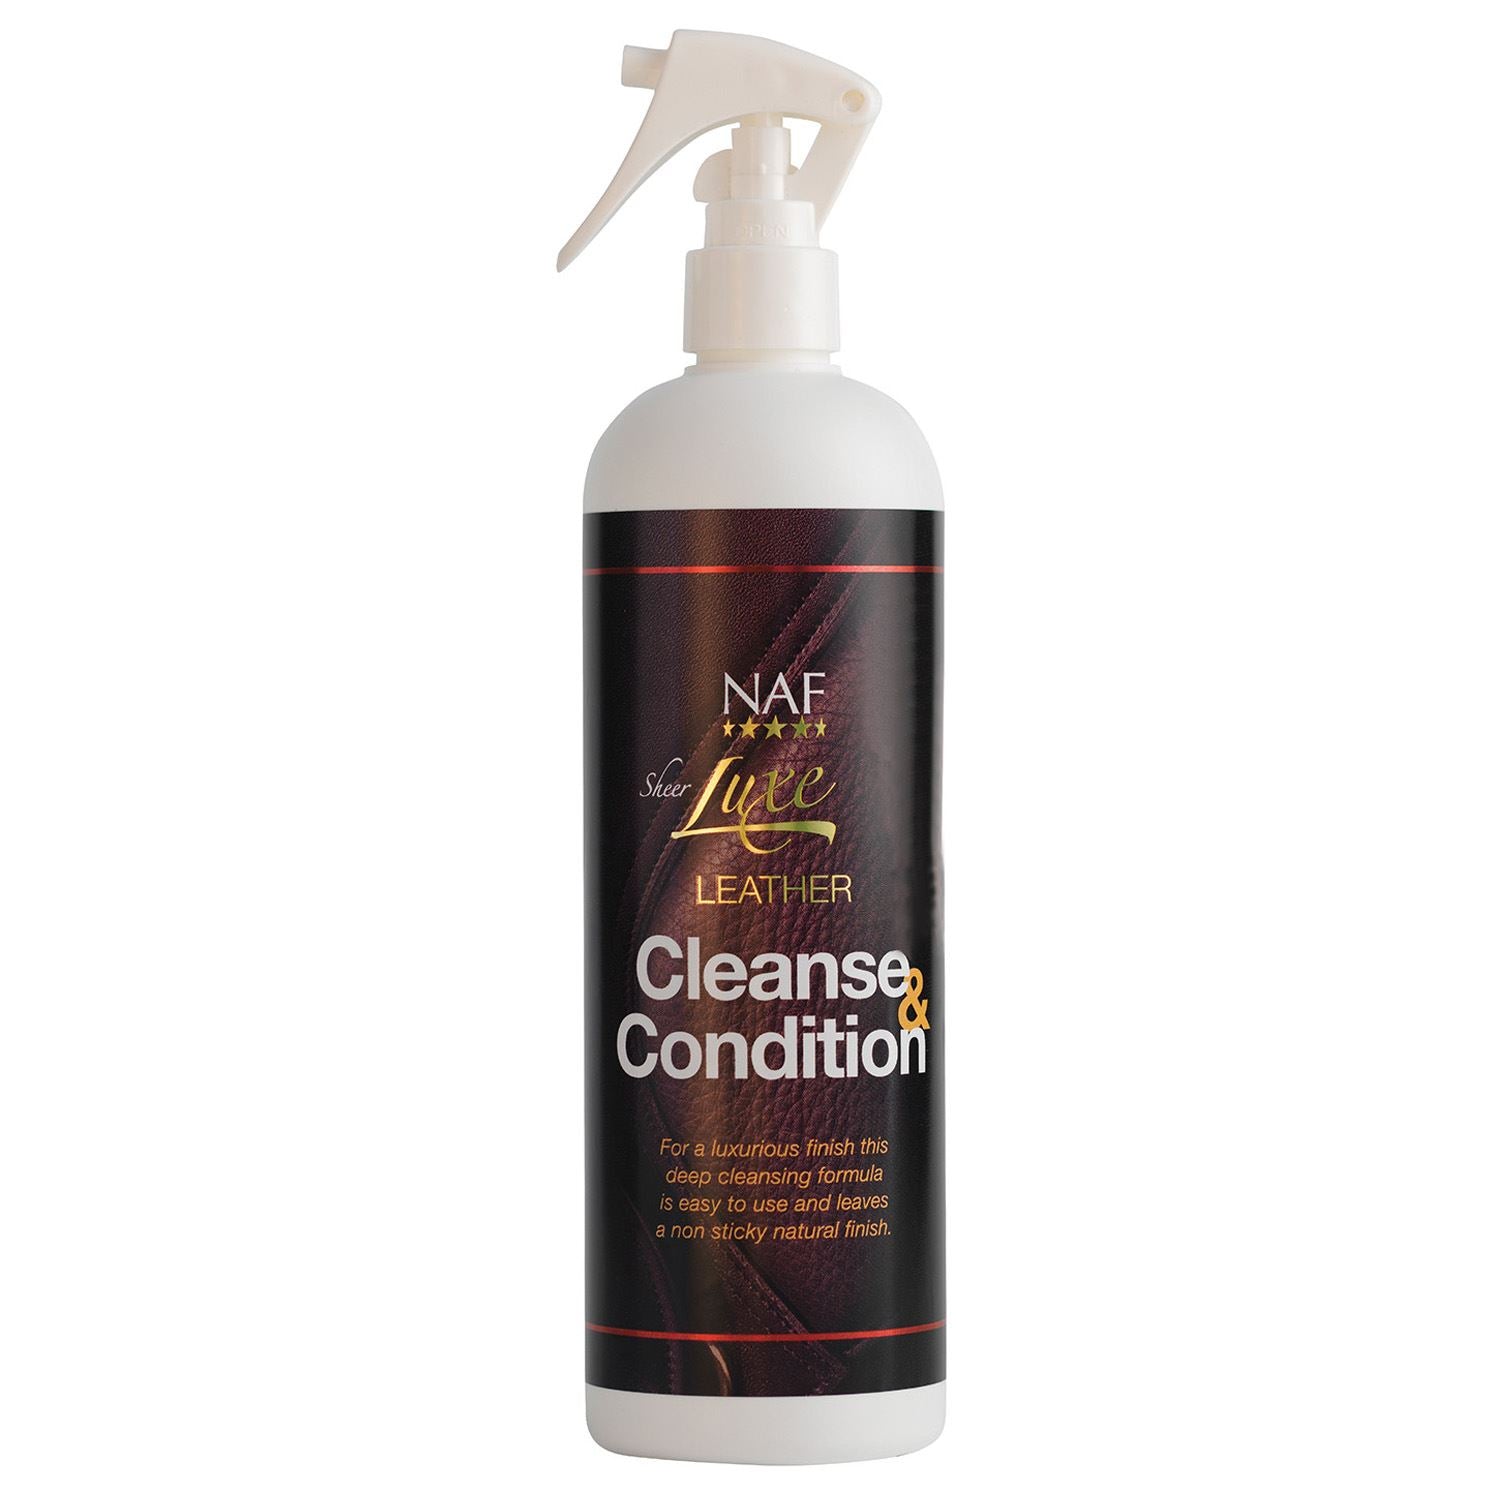 Naf Sheer Luxe Leather Cleanse & Condition - Just Horse Riders